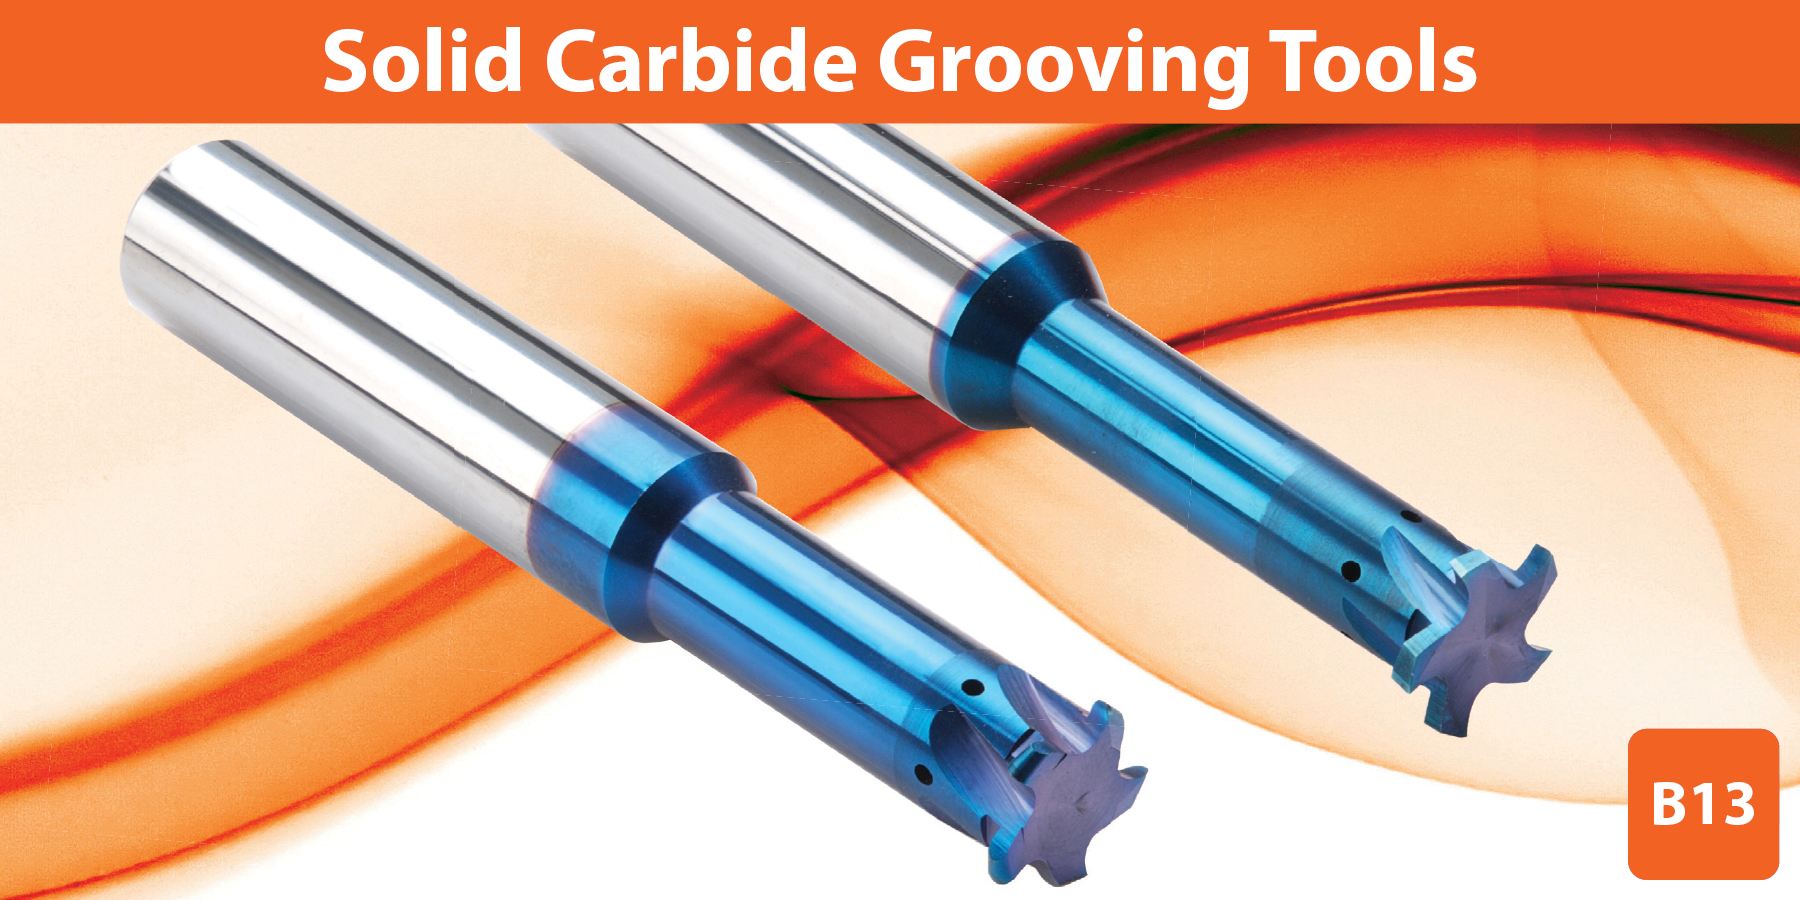 B13_Solid_Carbide_Grooving